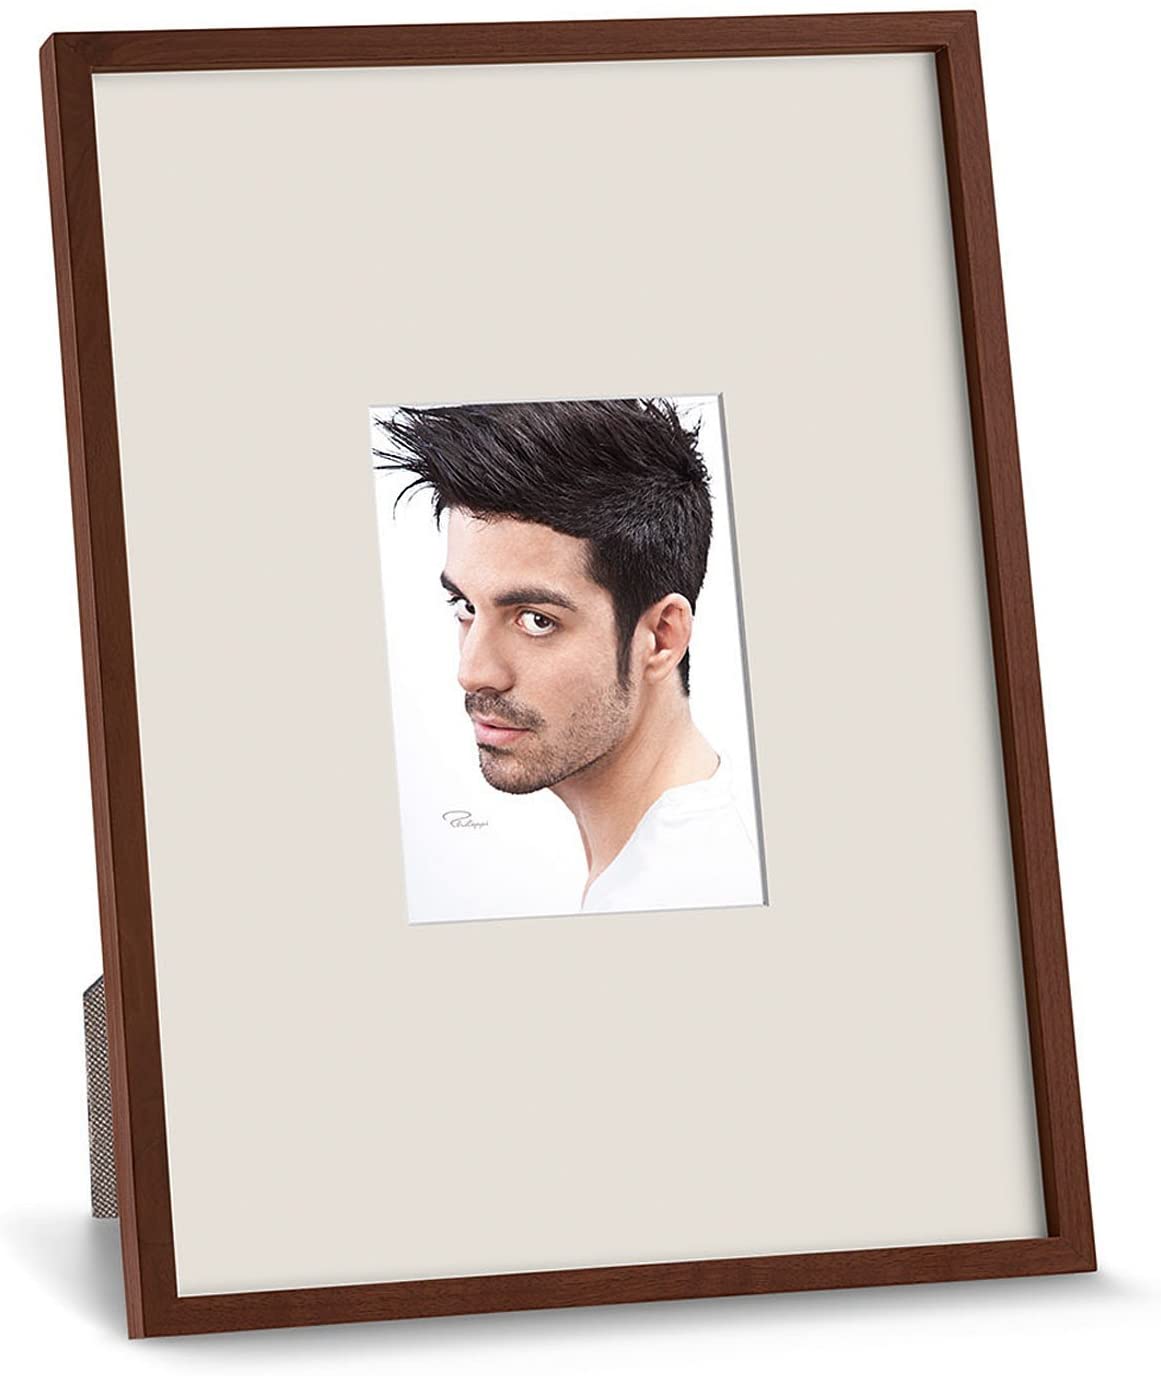 Philippi C Frame 13 x 18 cm Large Picture Frame, Wood, brown, 13 x 13 x 18 cm